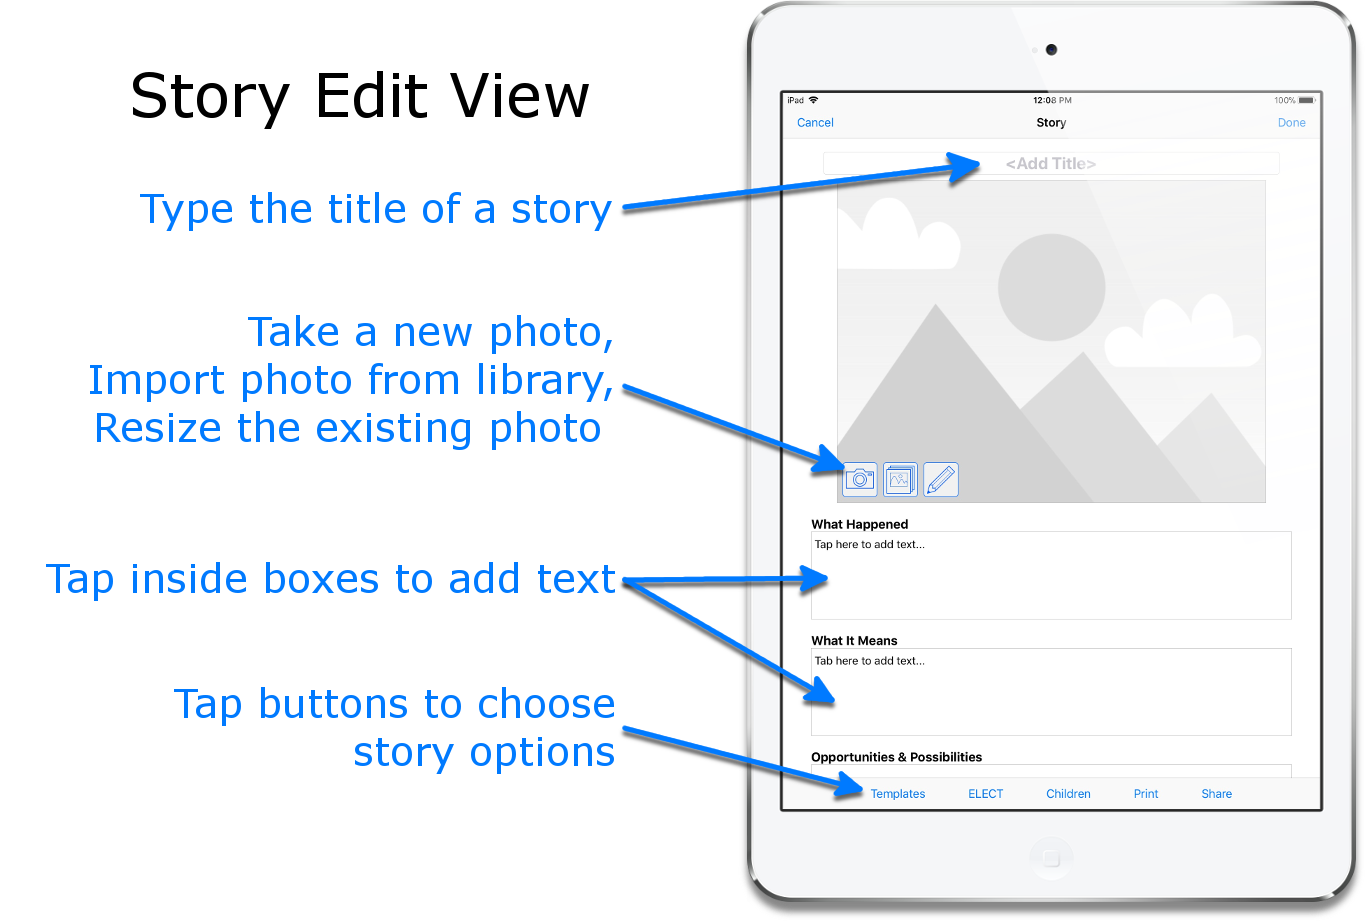 How to add text and photos in Story edit view